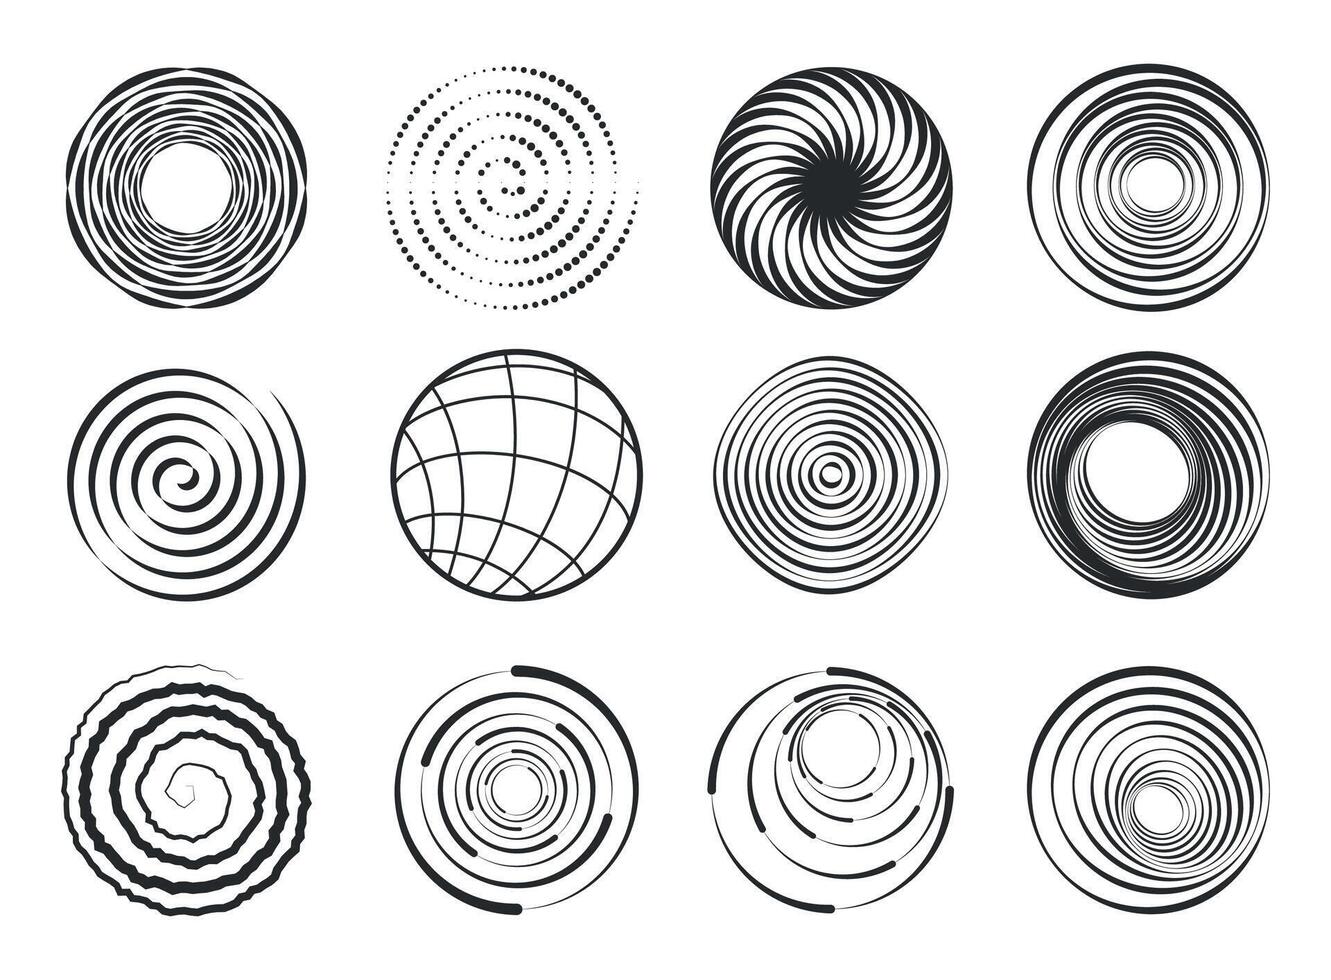 Spiral shapes. Abstract swirl geometric figures, modern wavy circle spiral abstract elements, motion black border design elements vector